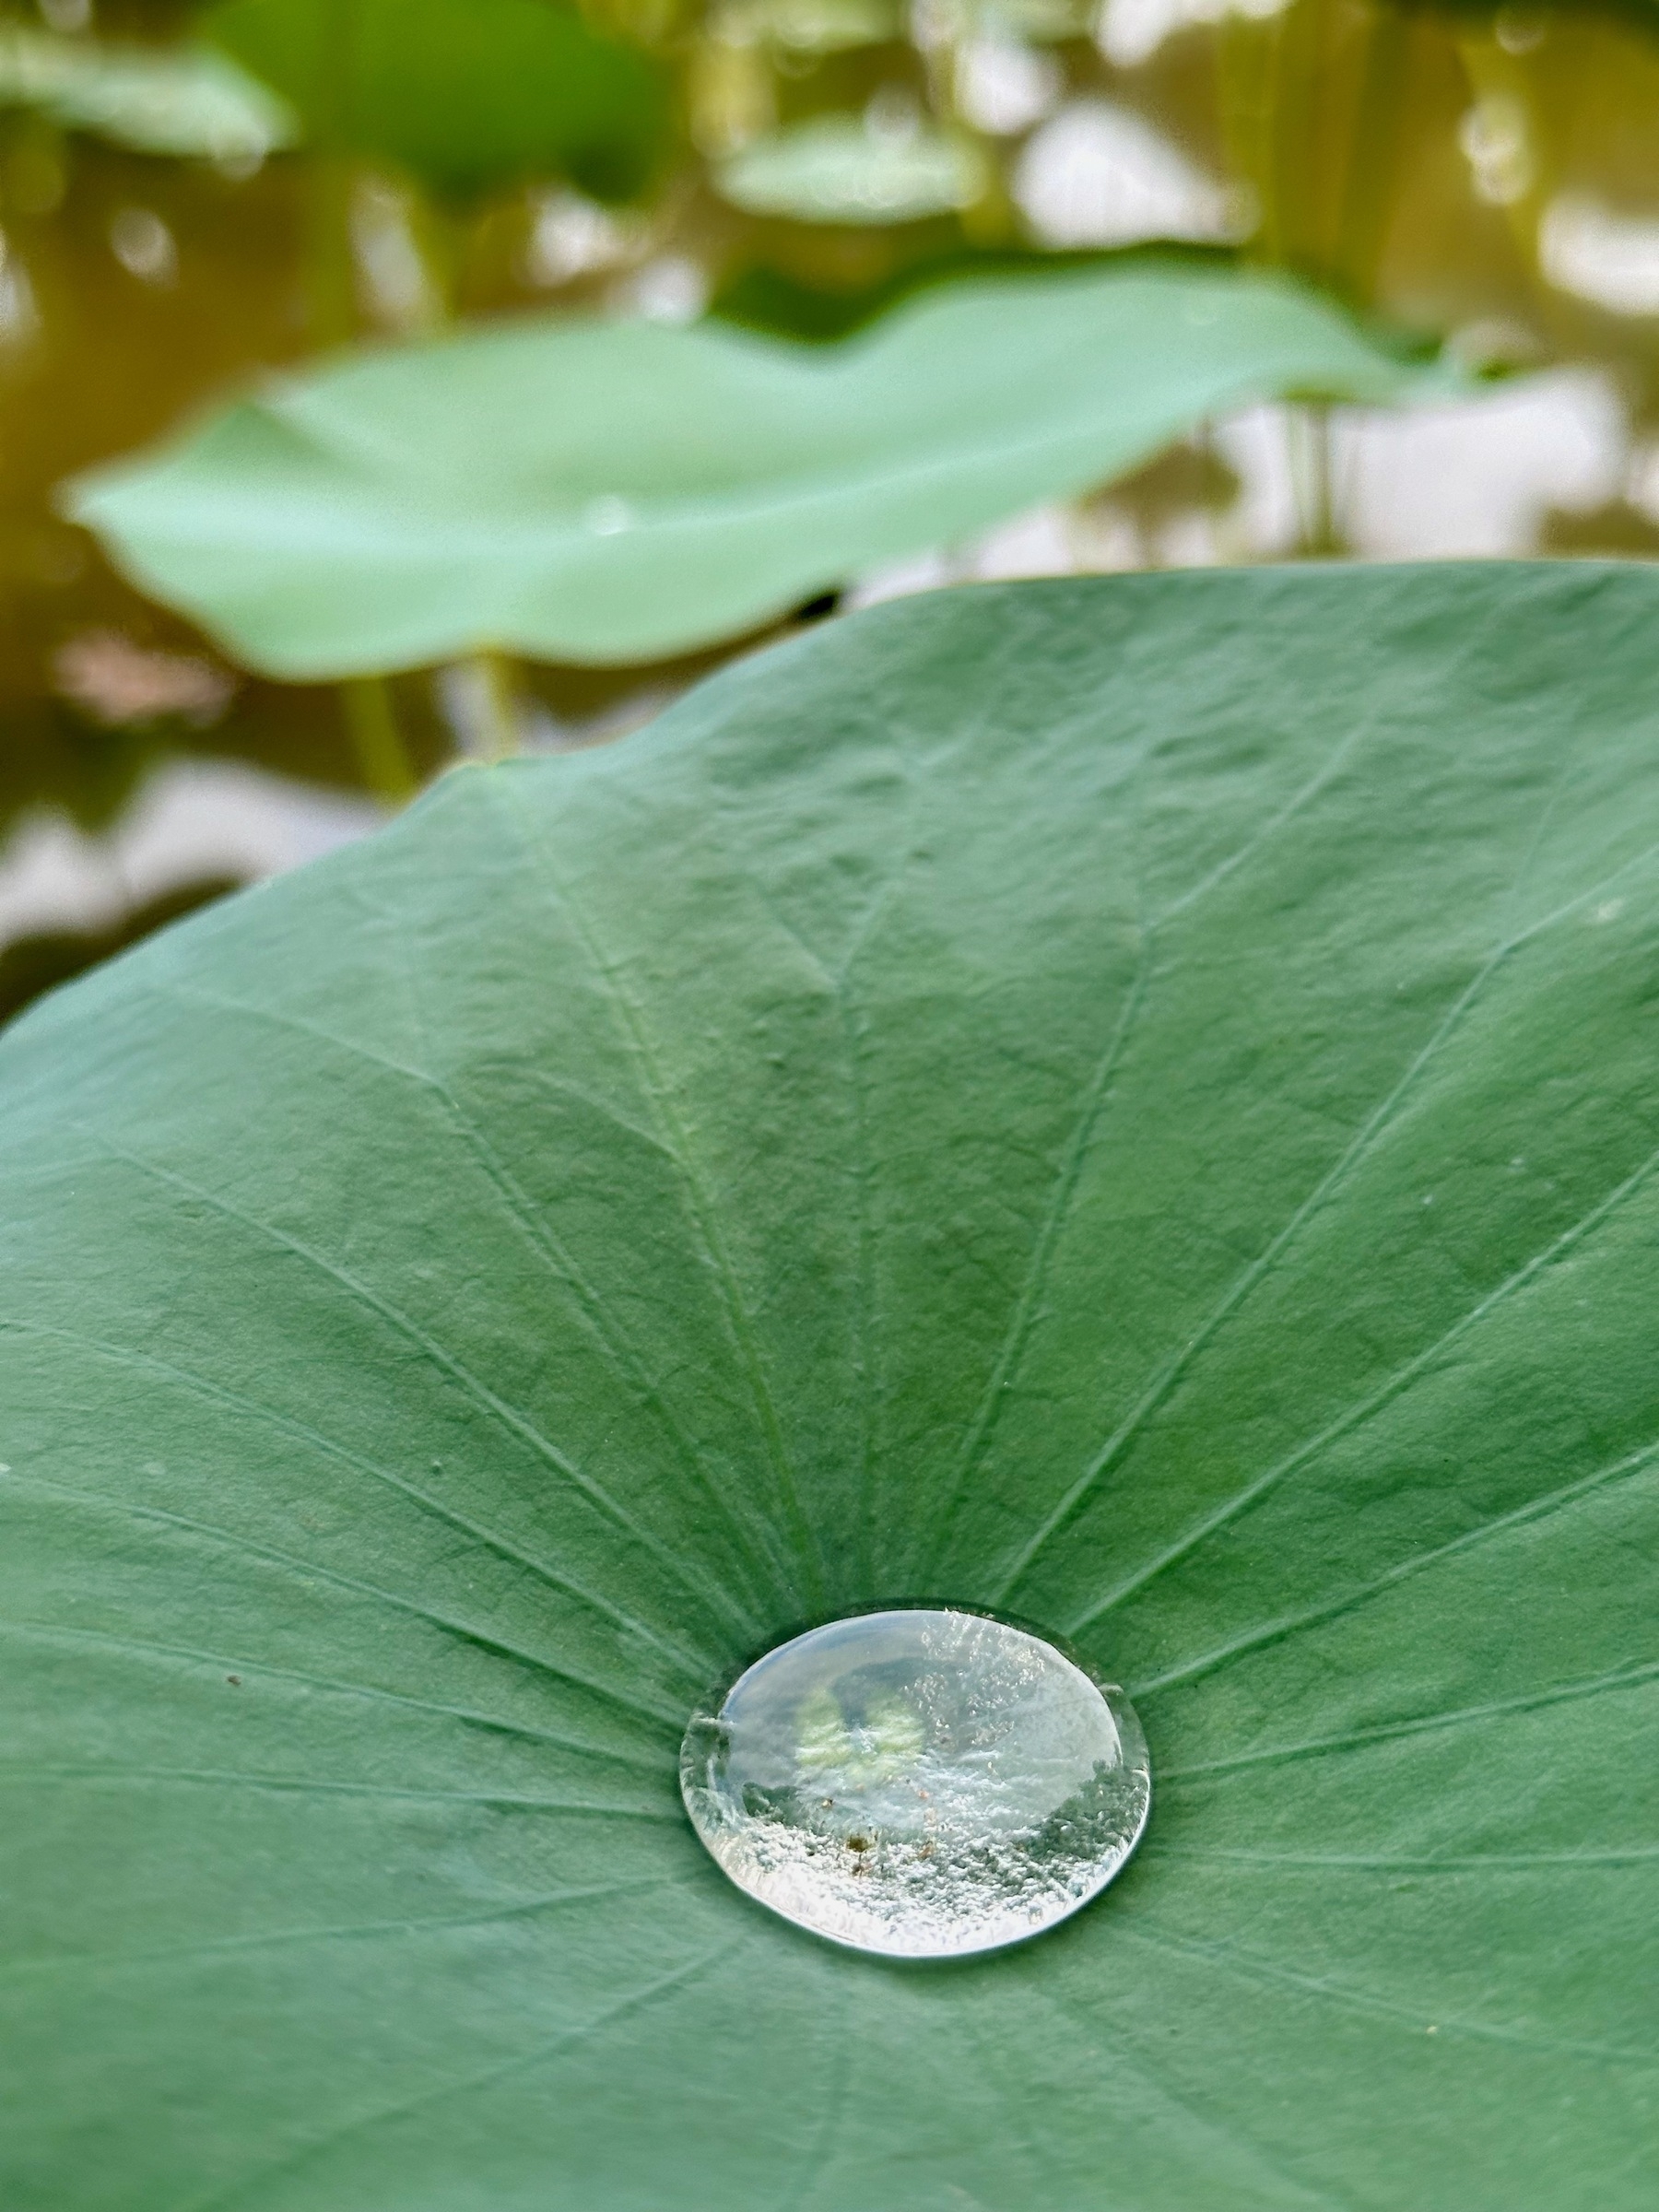 Macro photo of a small drop of clear water in the center of a dimpled green lotus leaf.